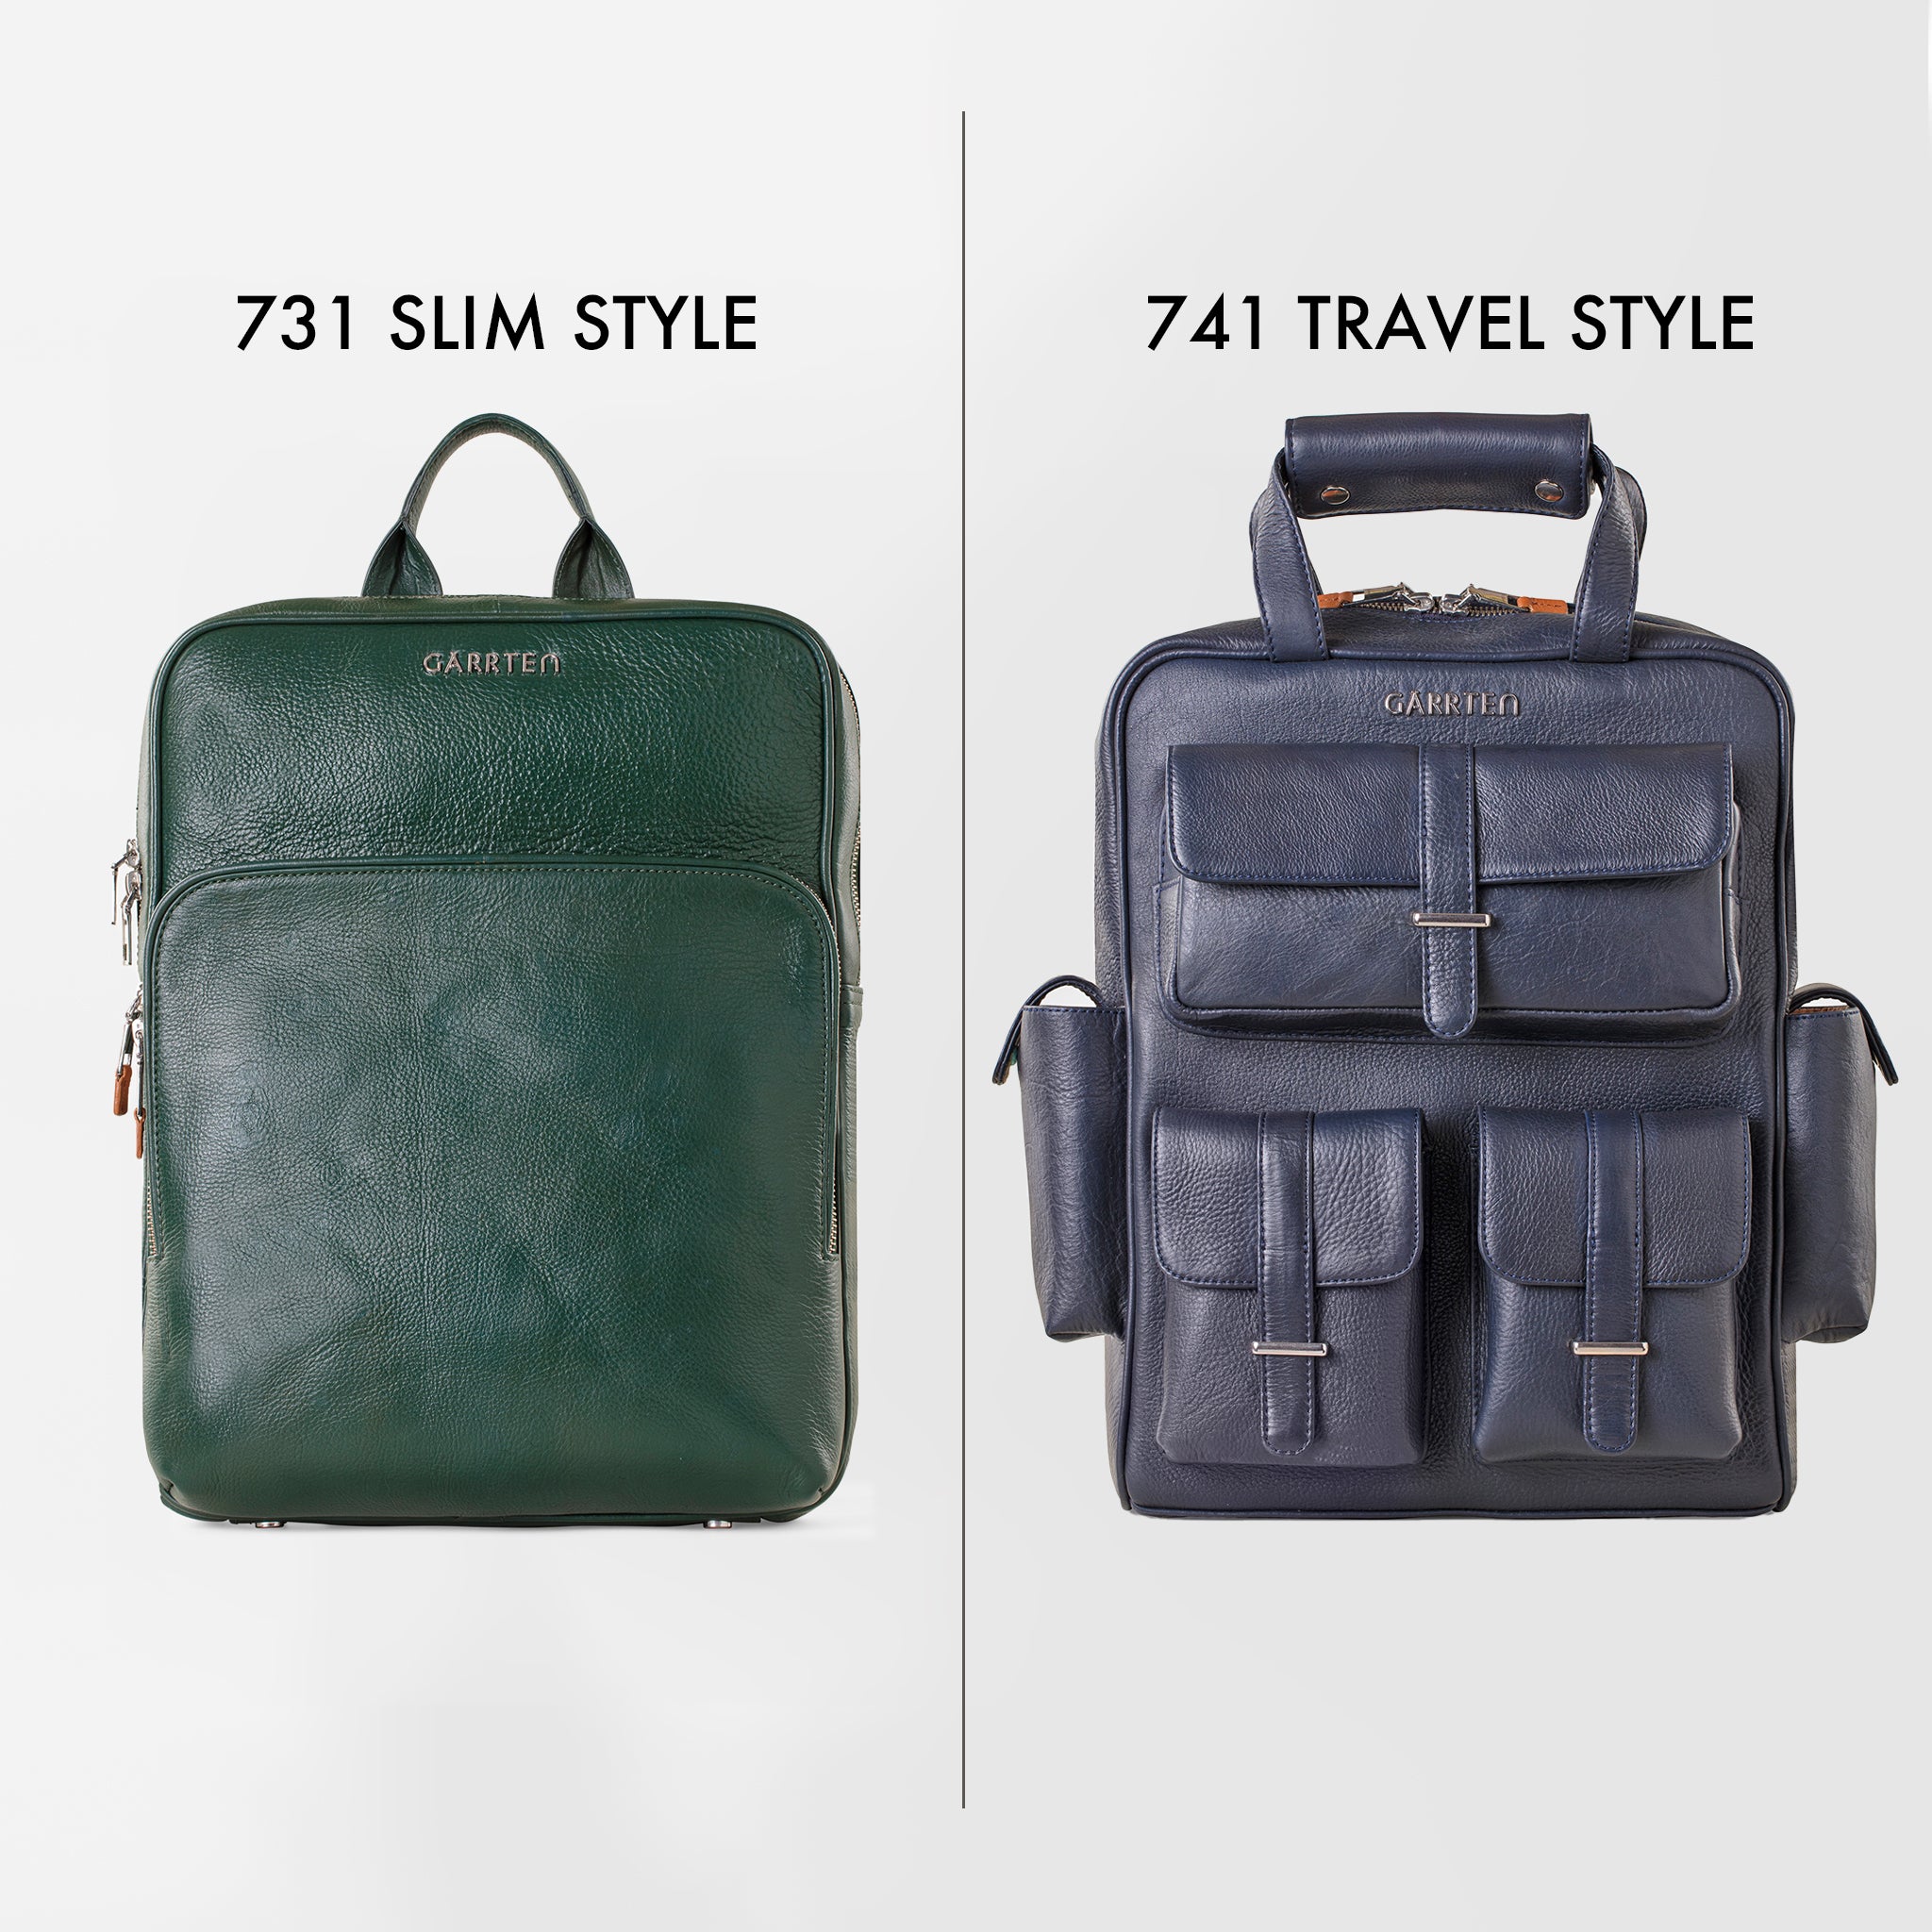 Work & Play Duo - Leather Backpack set in Racing Green & Midnight